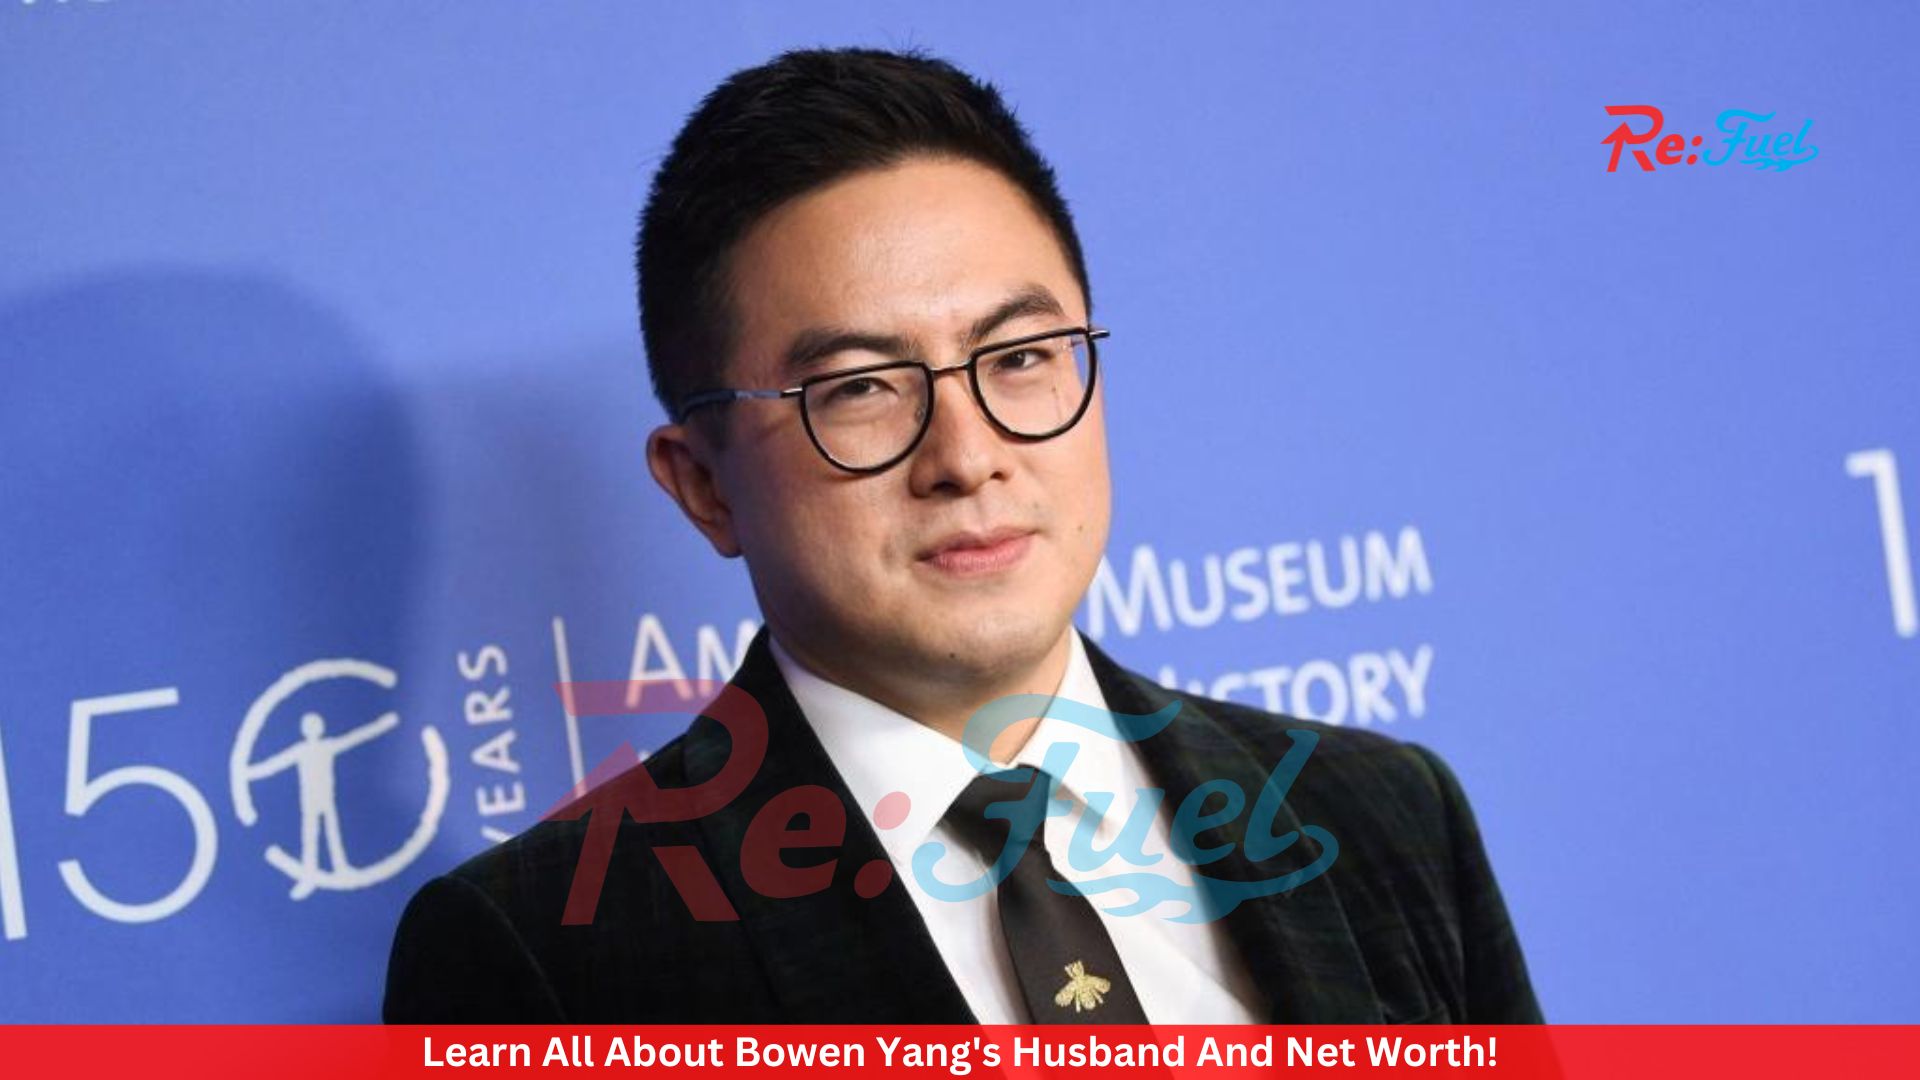 Learn All About Bowen Yang's Husband And Net Worth!